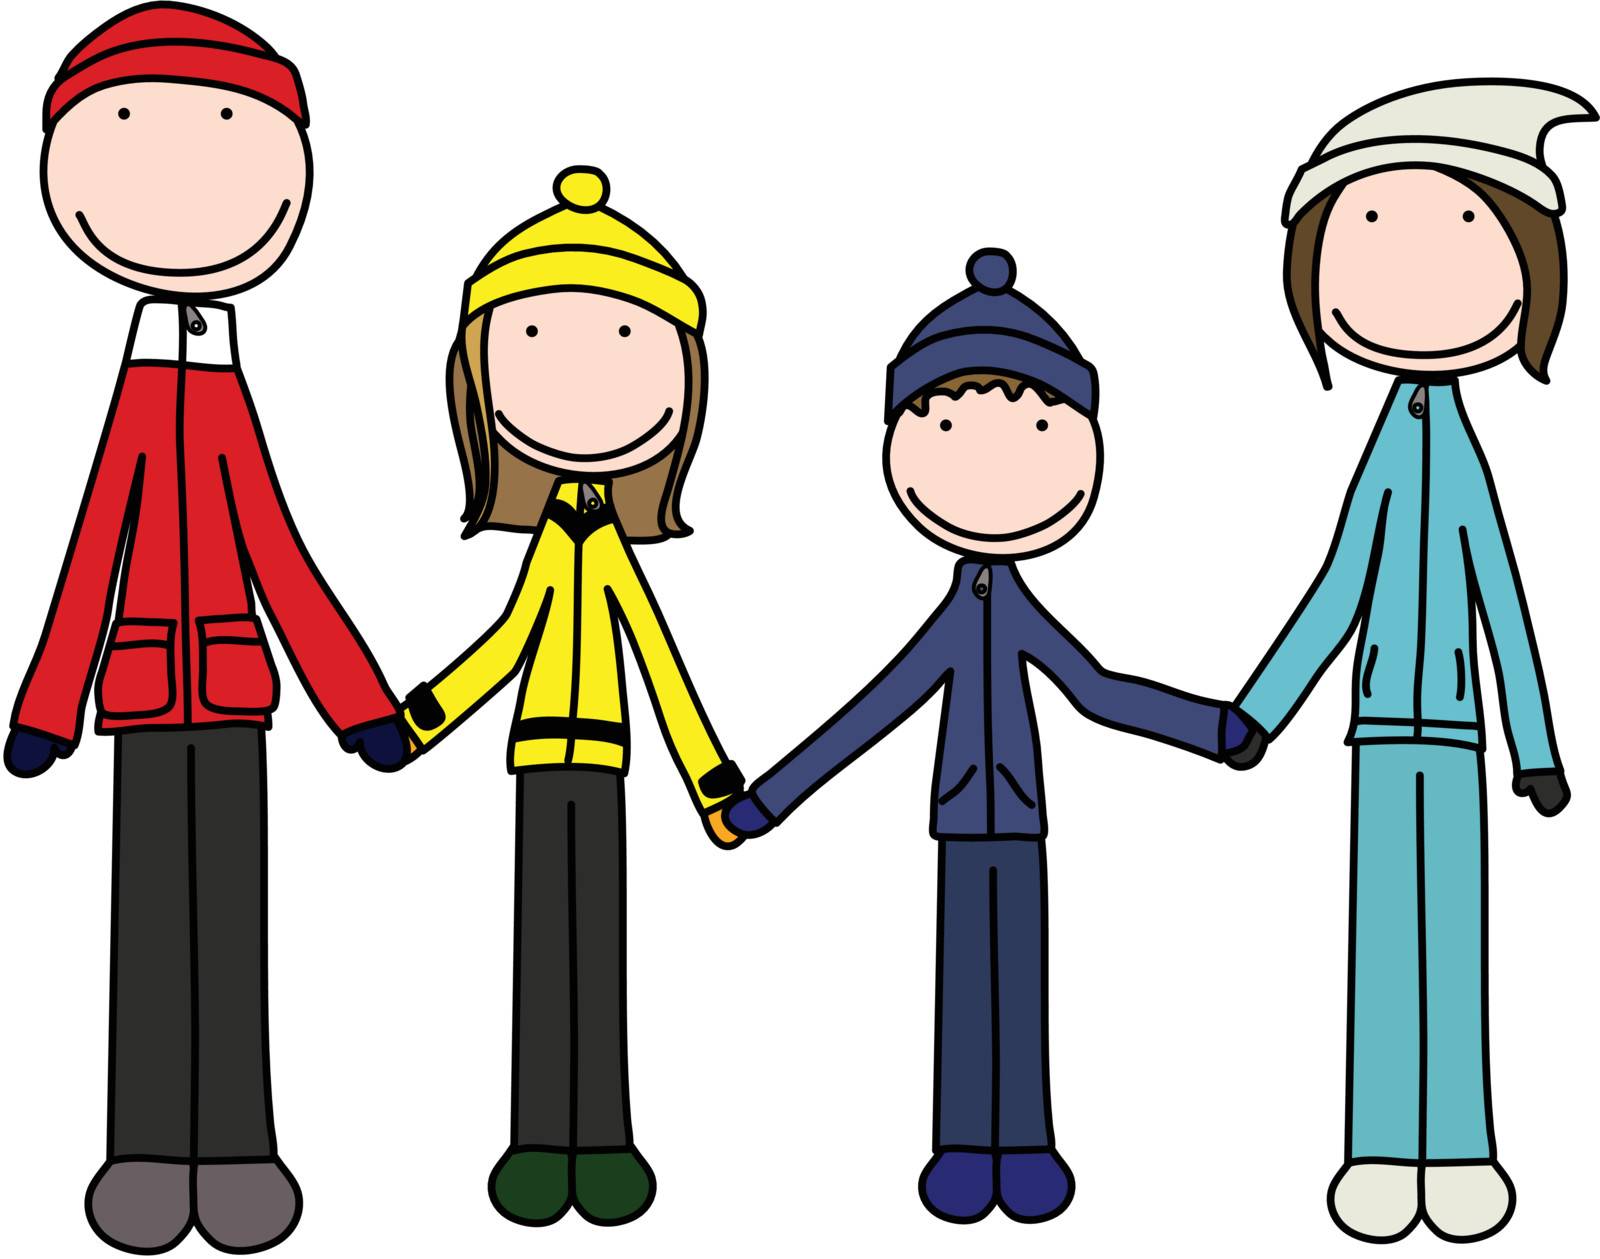 Illustration of happy family in winter clothes